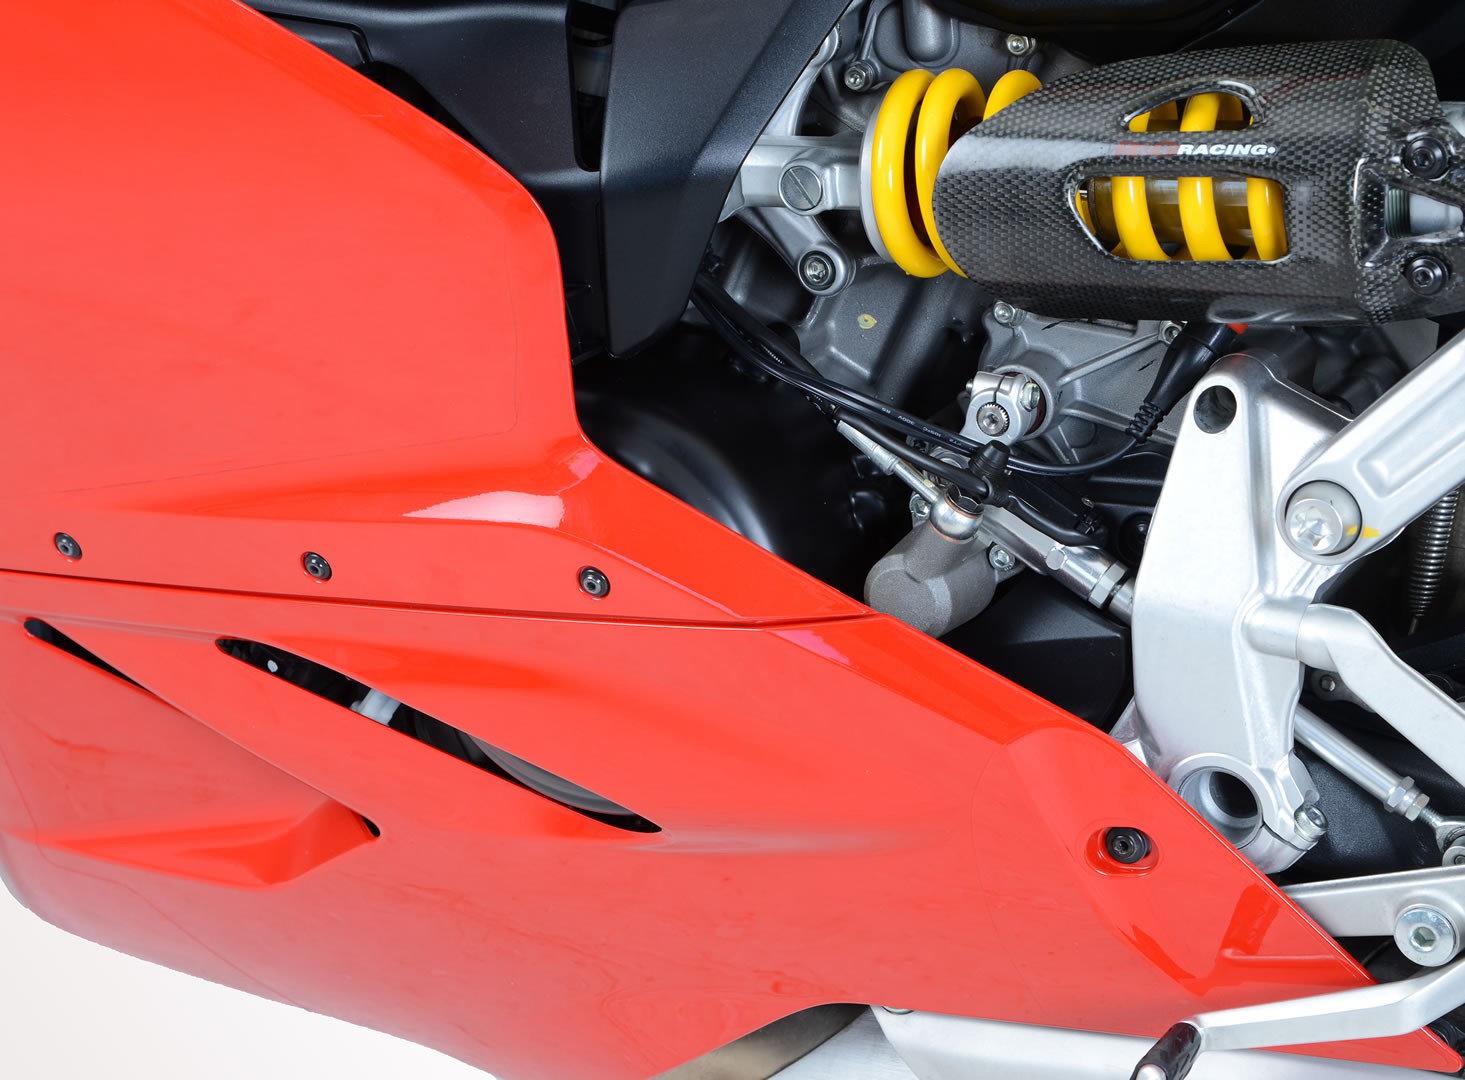 R&G Left Engine Case Cover for Ducati Panigale 899